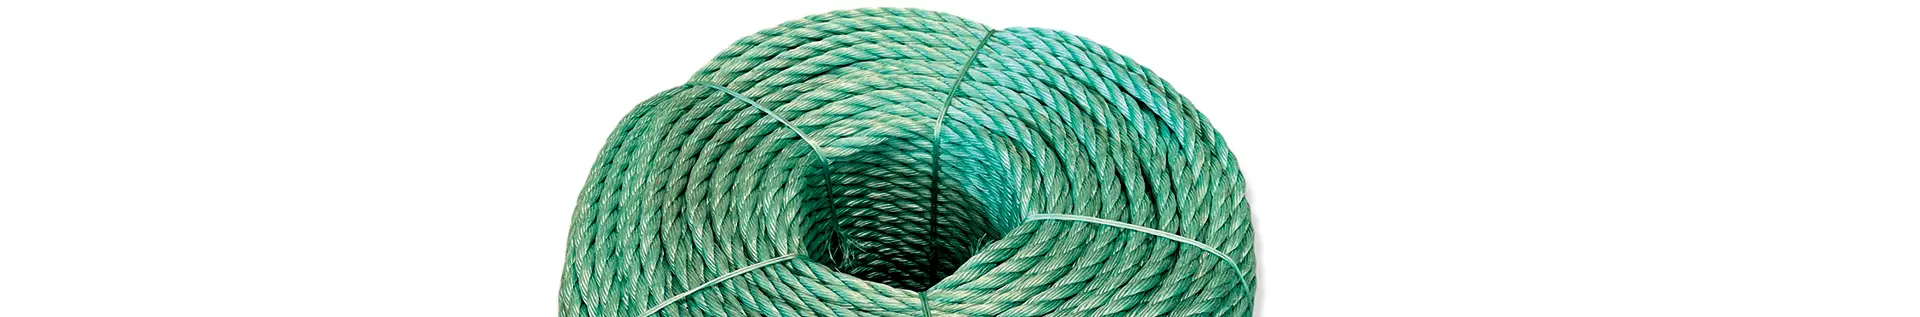 Ropes for workers' fall arrest nets